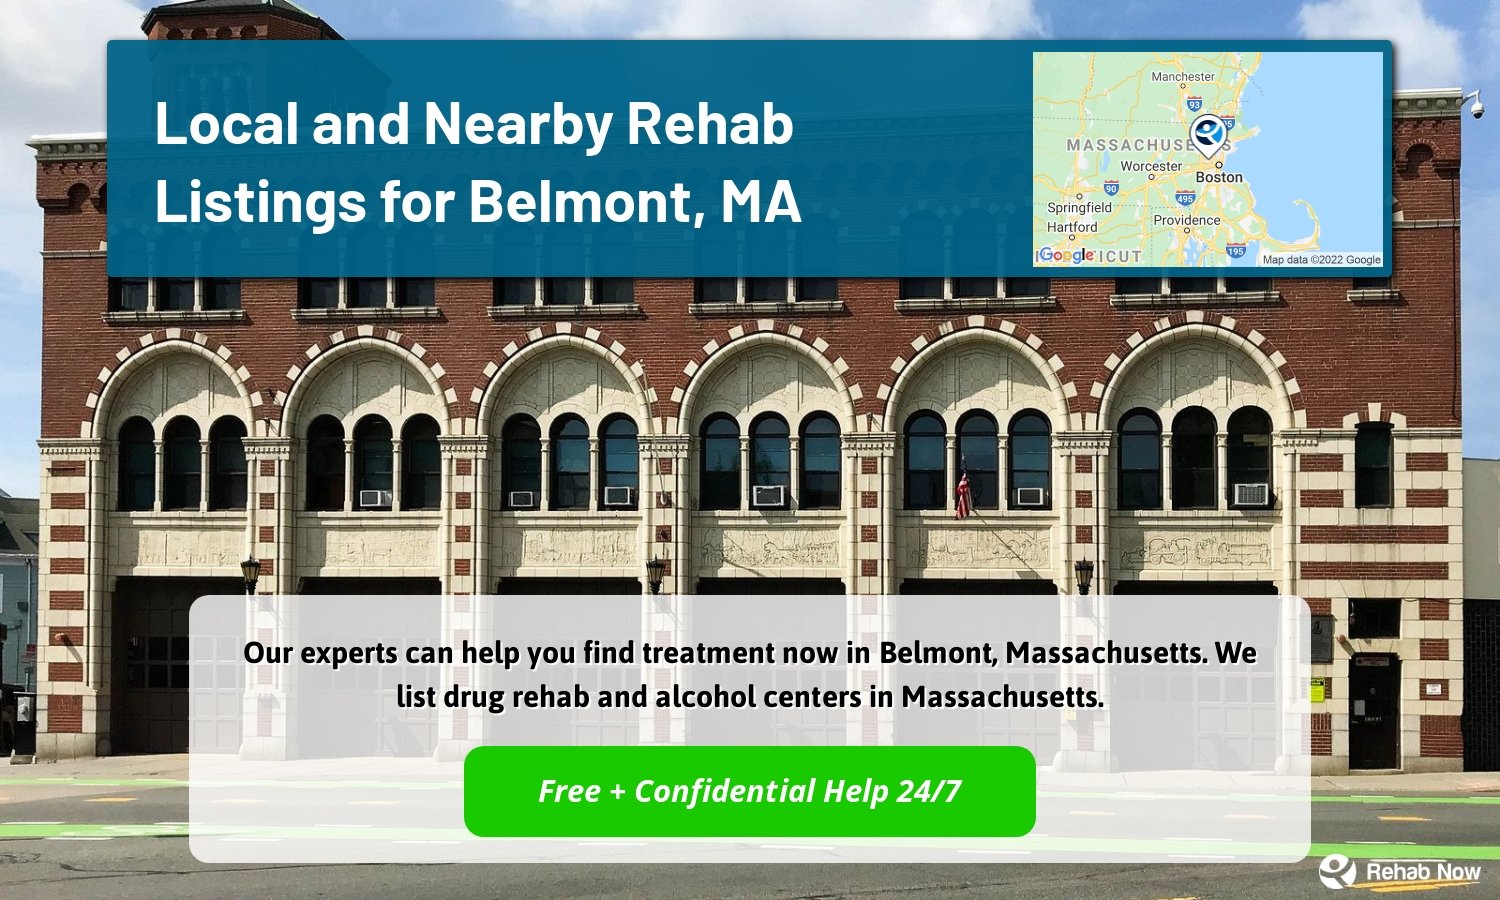 Our experts can help you find treatment now in Belmont, Massachusetts. We list drug rehab and alcohol centers in Massachusetts.